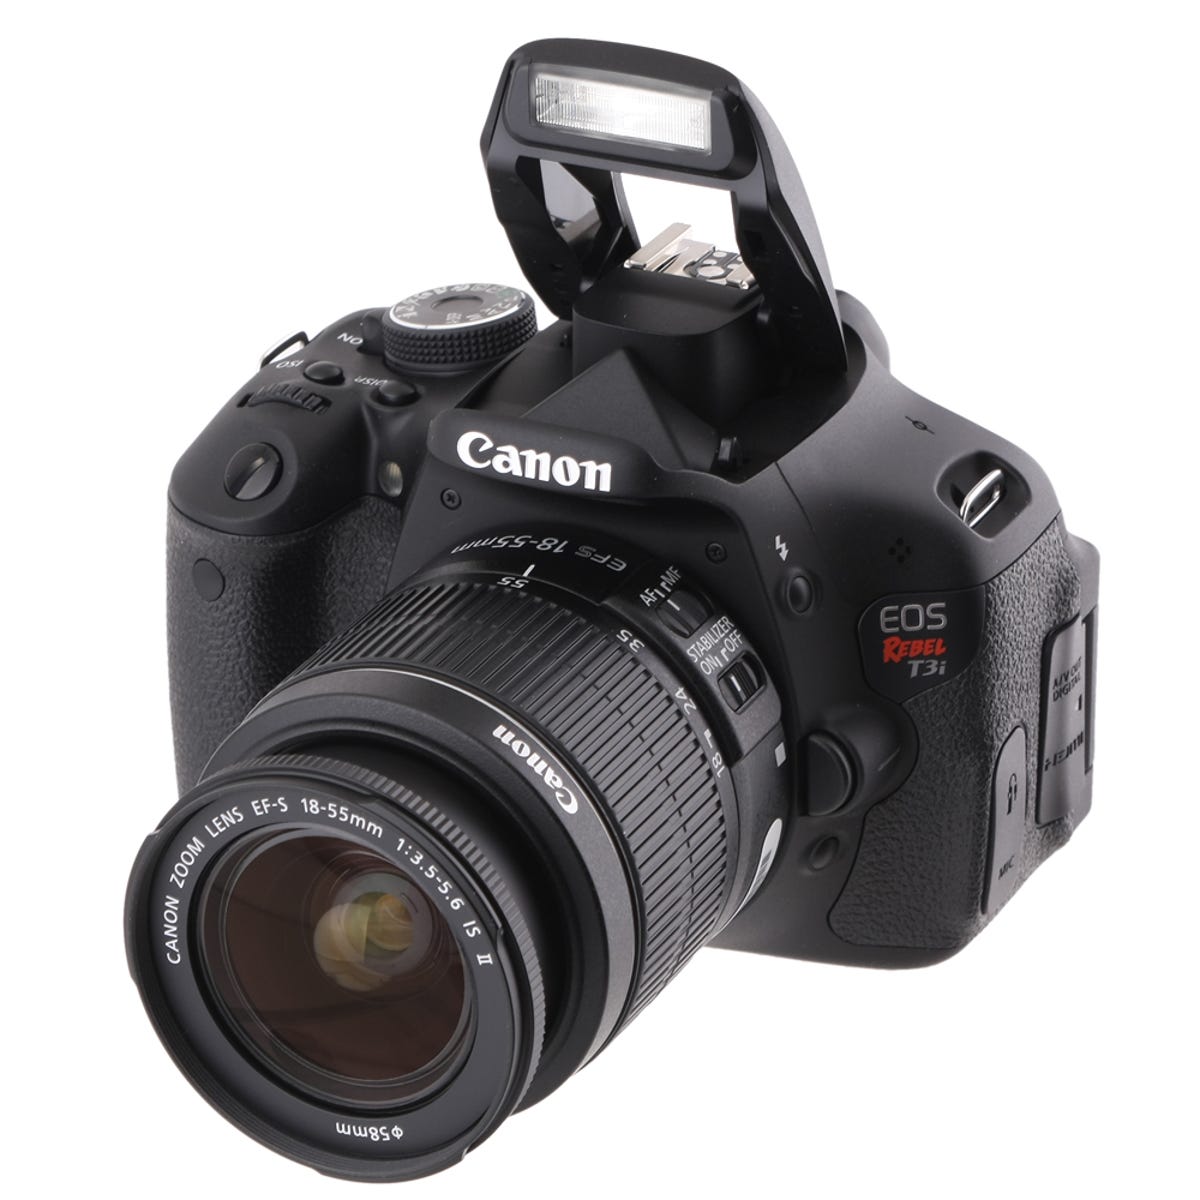 Canon EOS Rebel T3i review: Canon EOS Rebel T3i - CNET